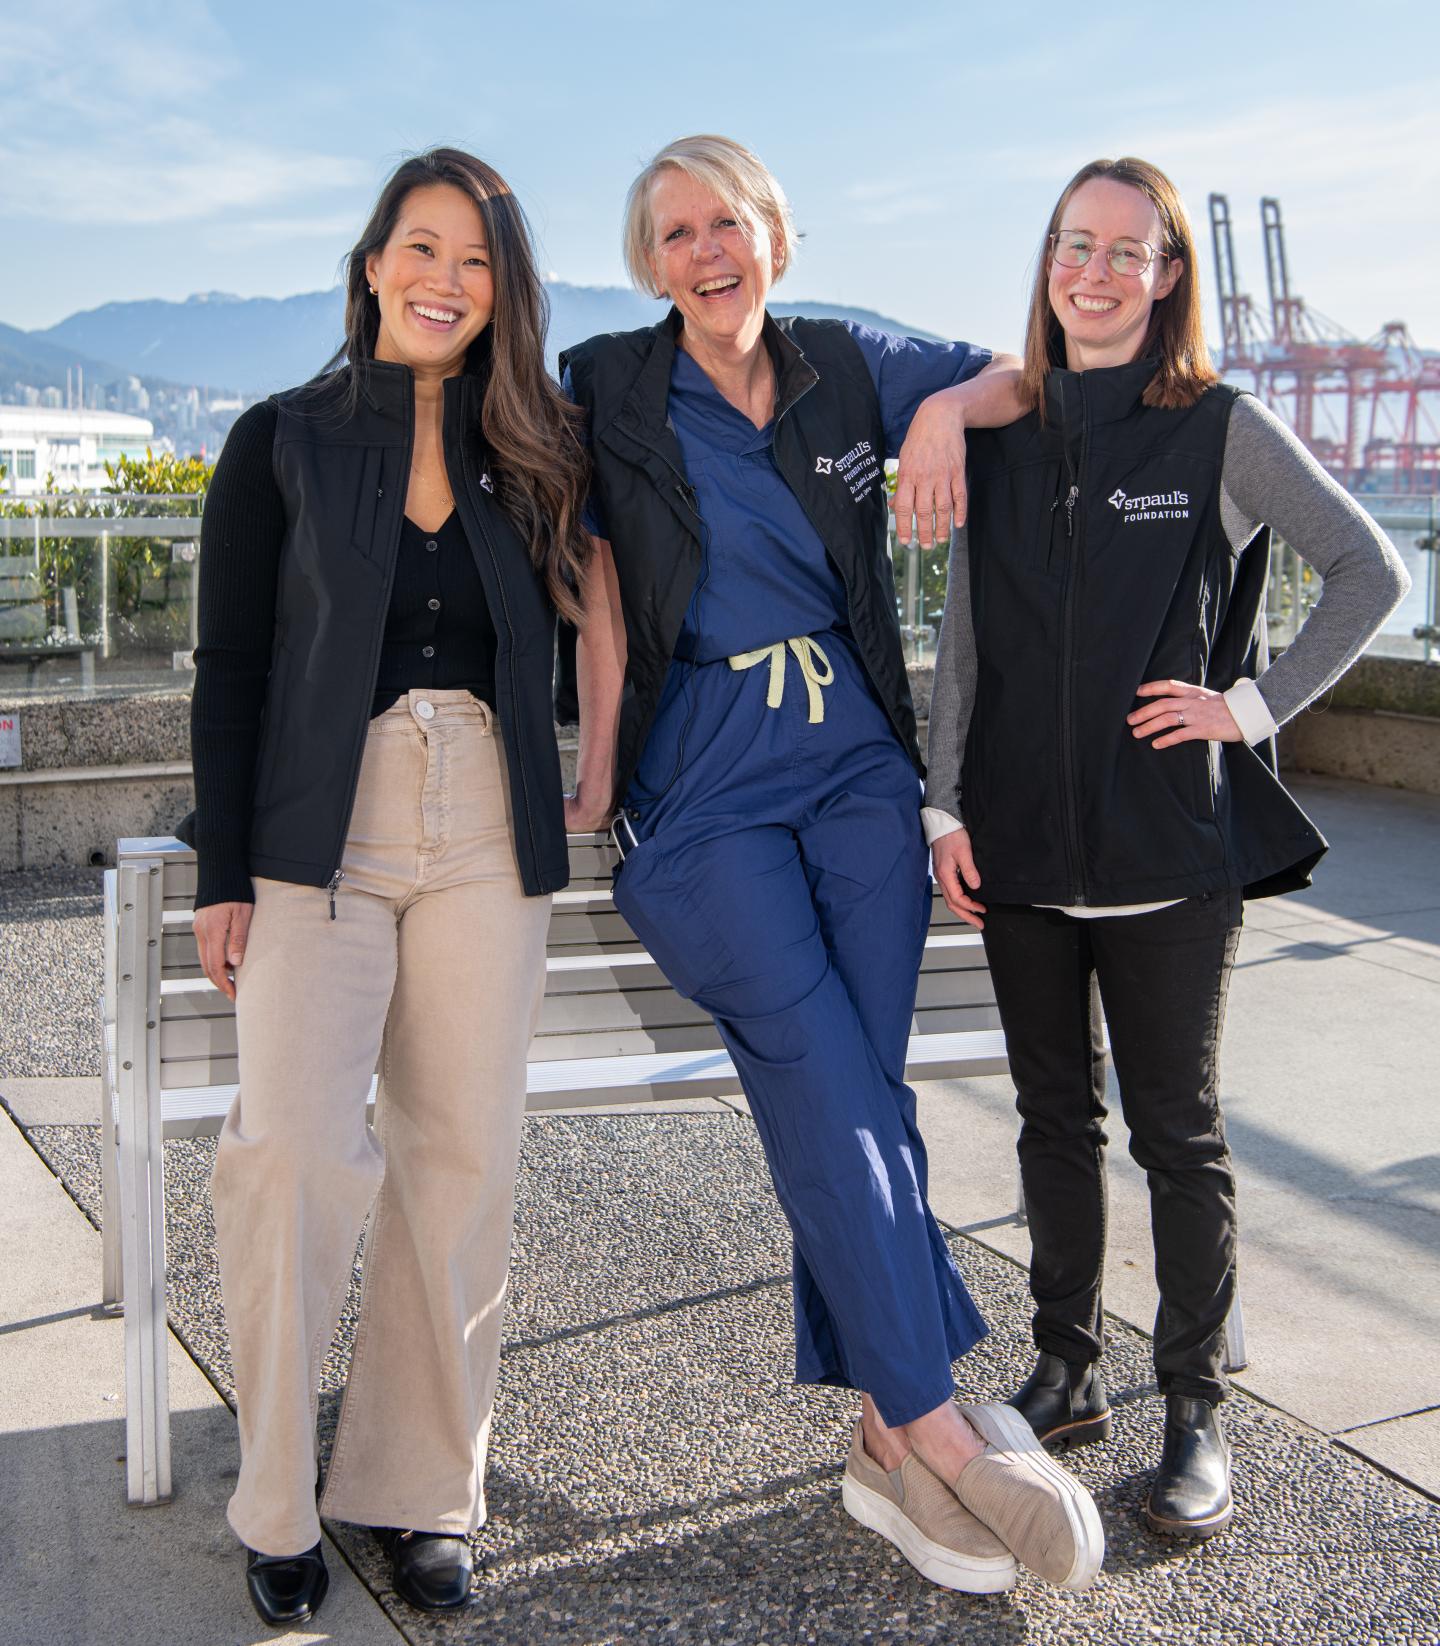 three people wearing hospital clothing smiling outdoors